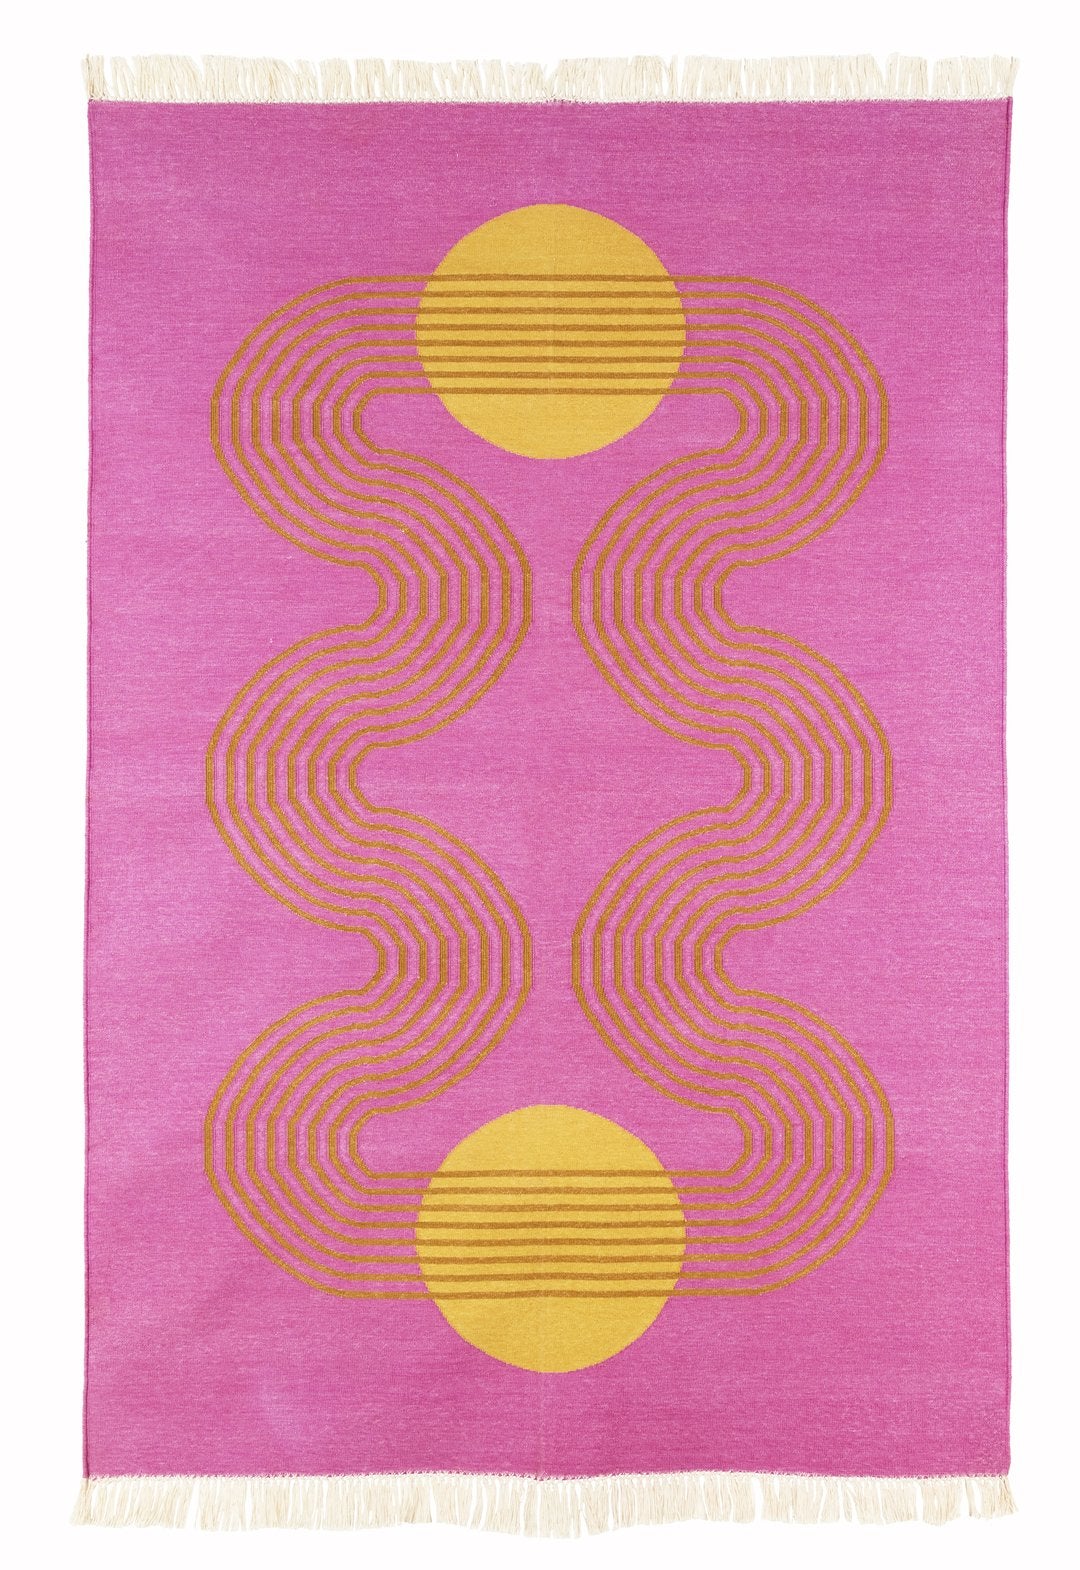 20 Gorgeous Rugs, Because We All Deserve to Be Floored Once in a While